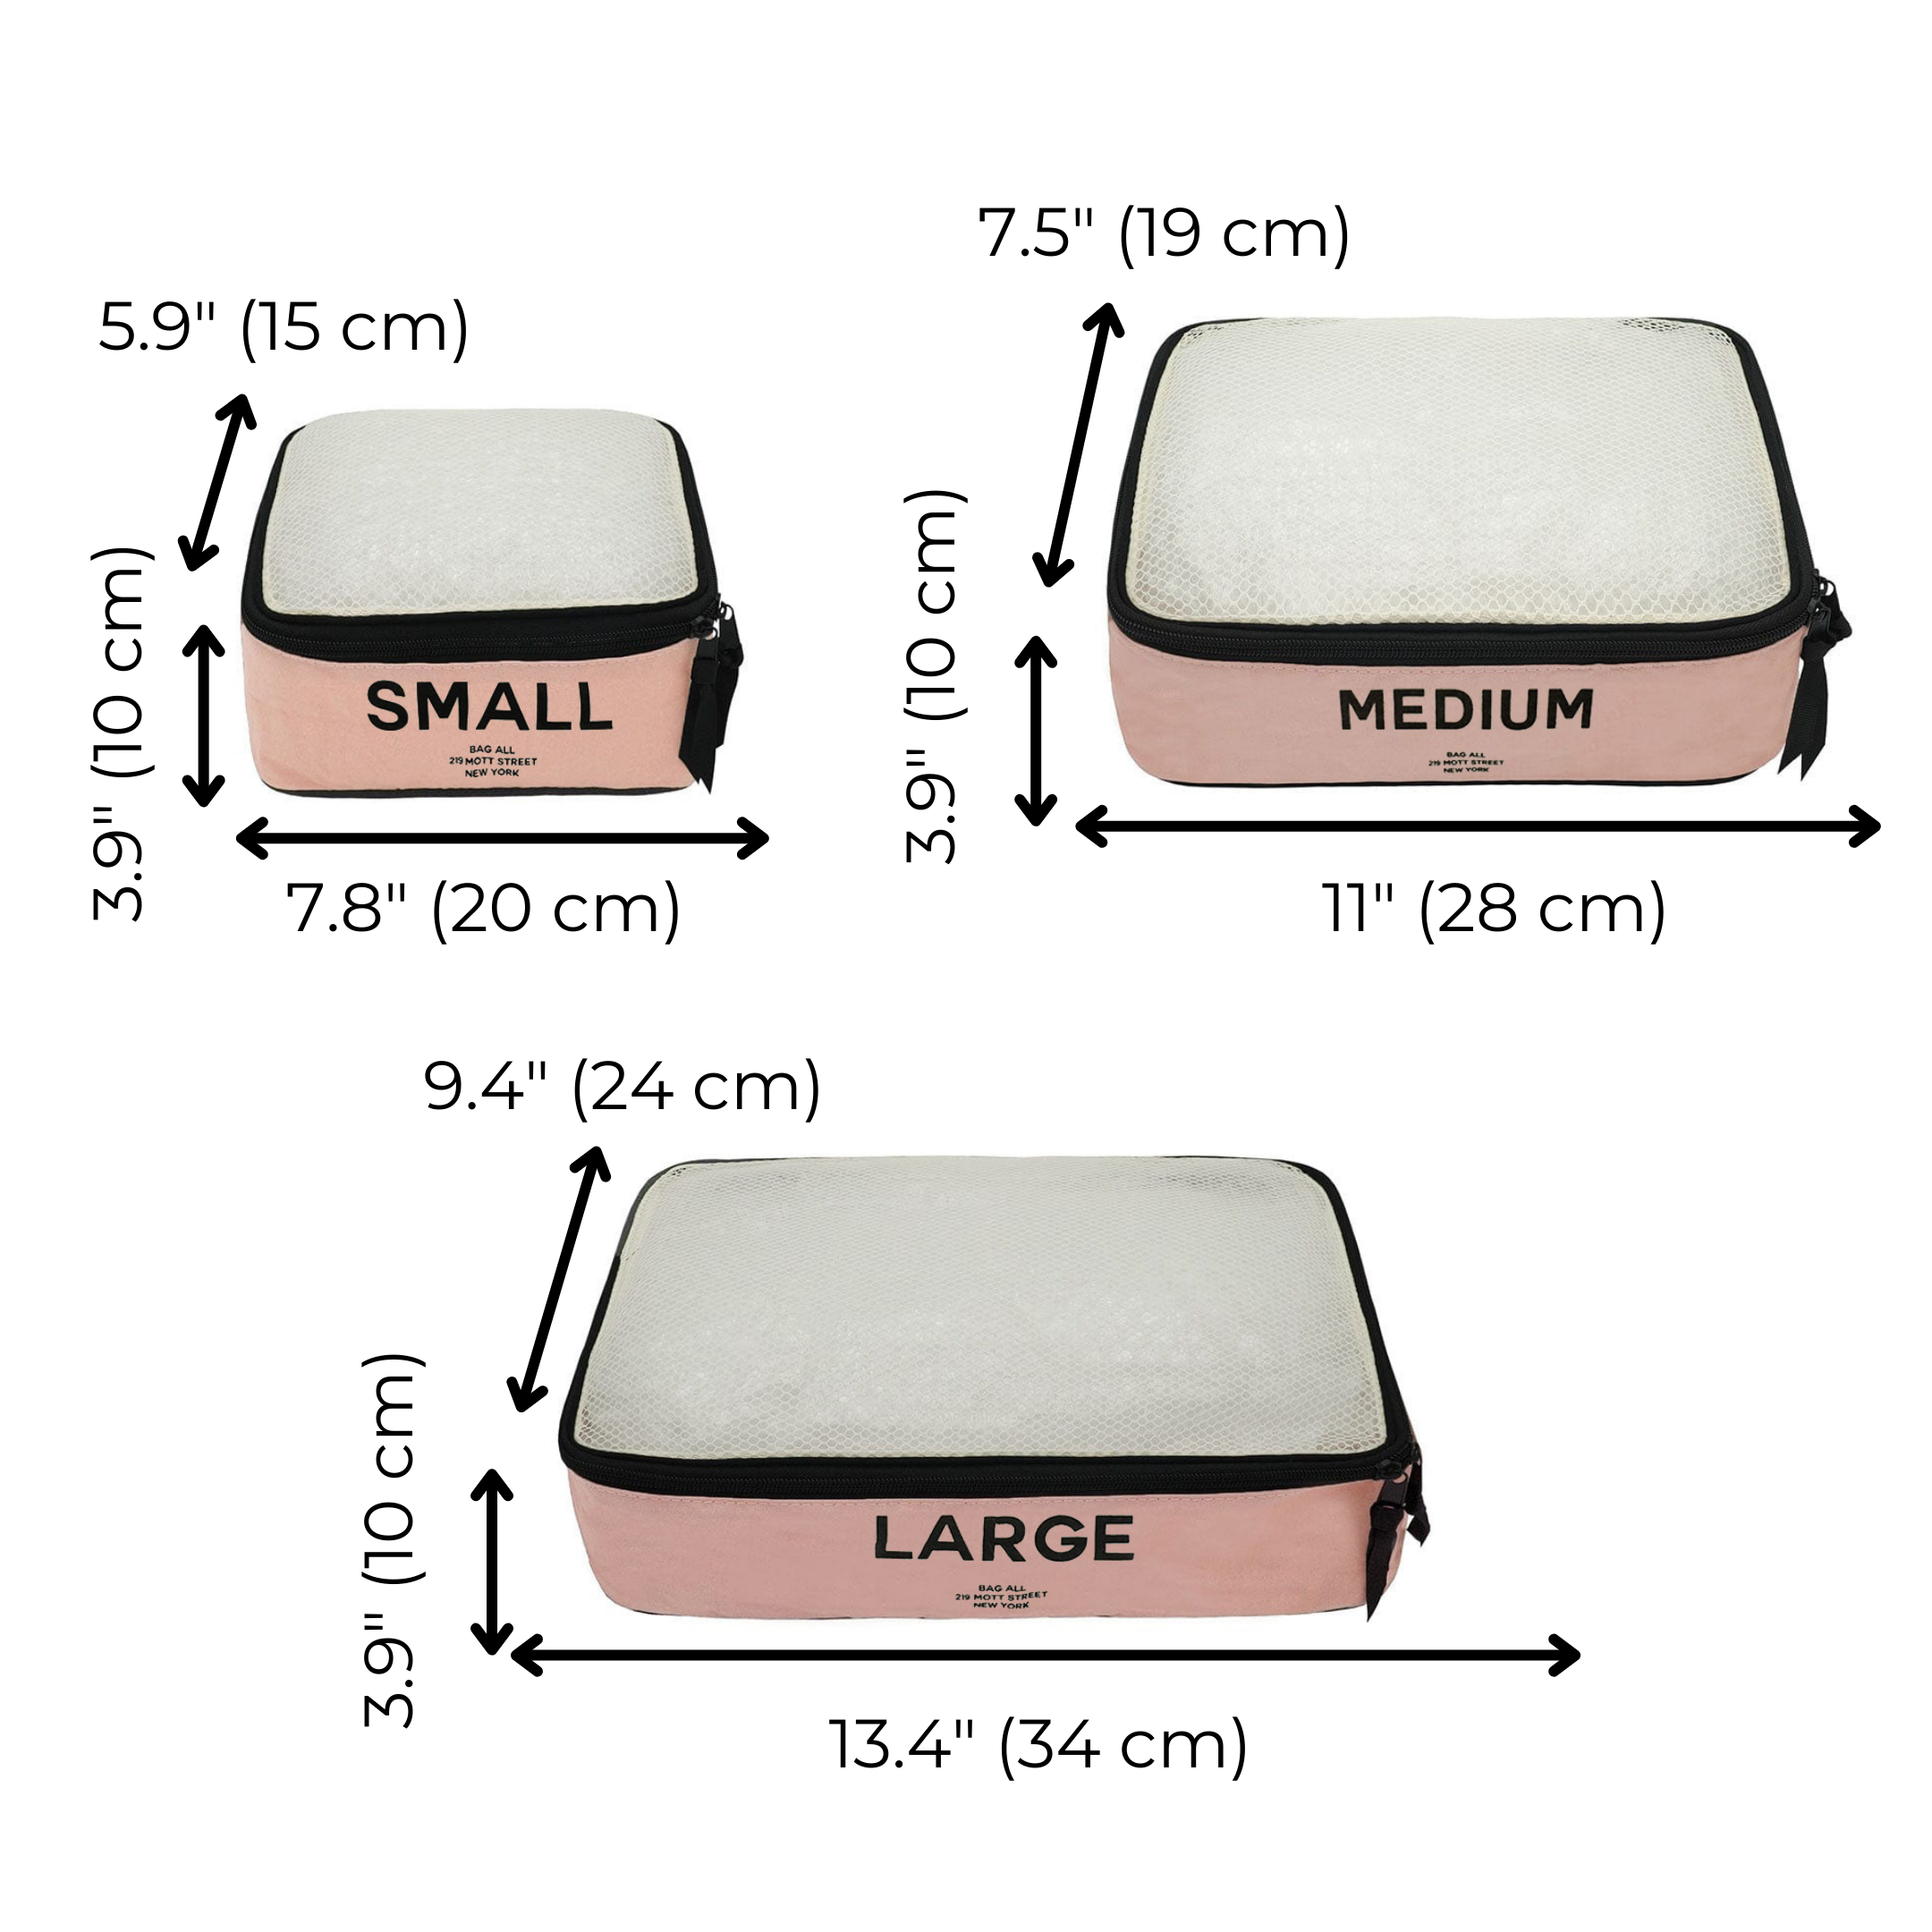 Cotton Packing Cubes, Print, 3-pack Pink/Blush | Bag-all